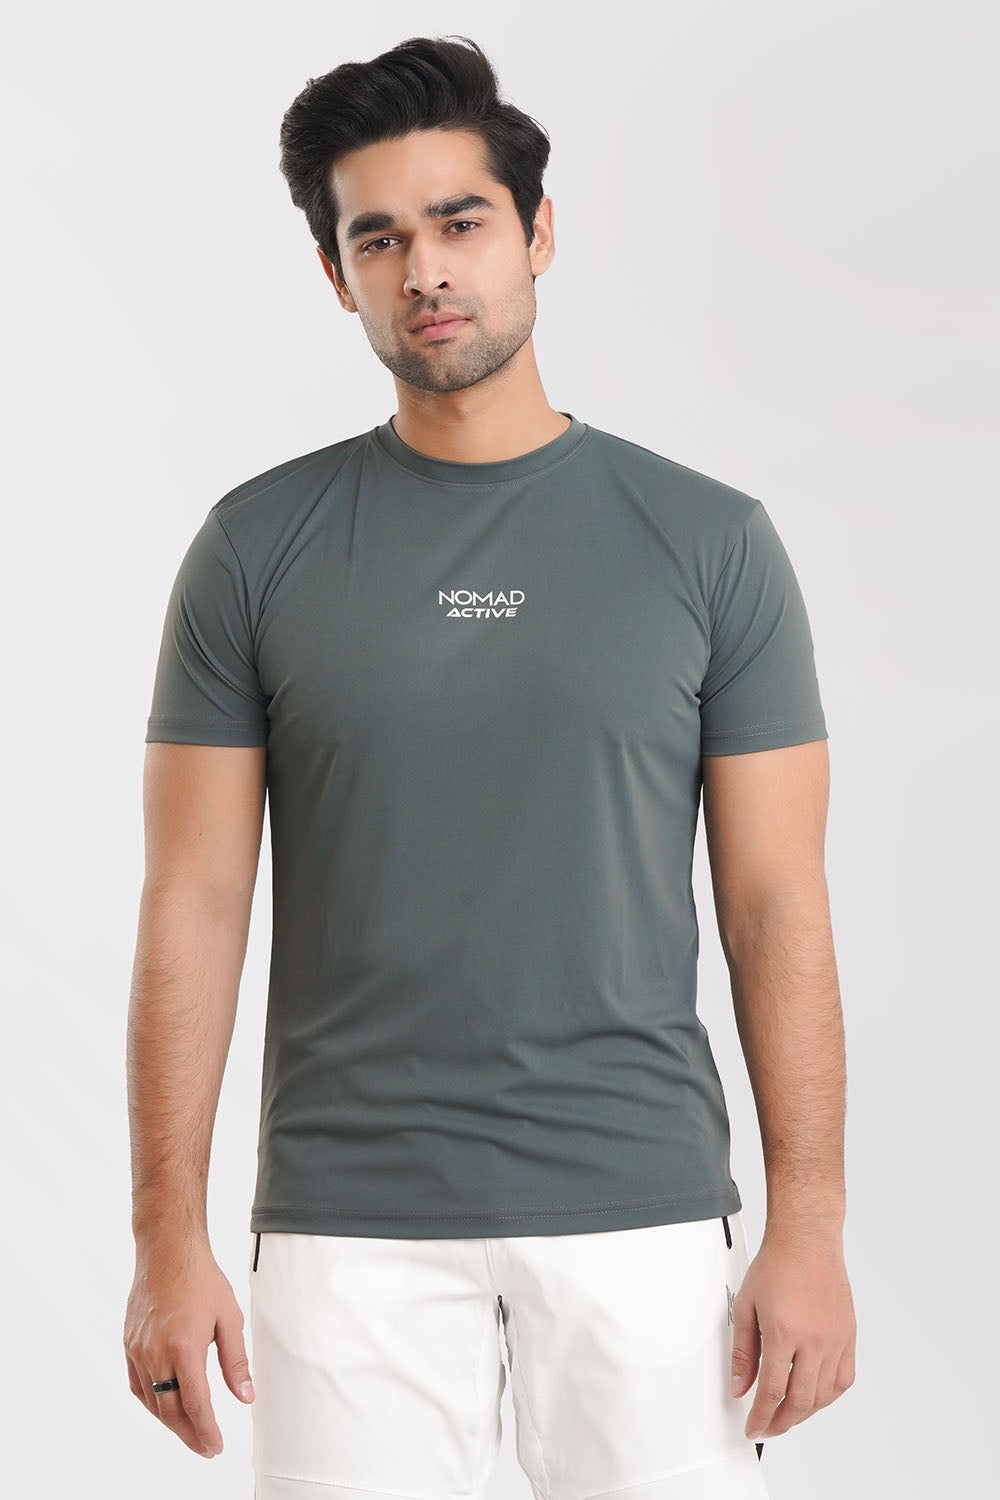 NOMAD ACTIVE T.SHIRT